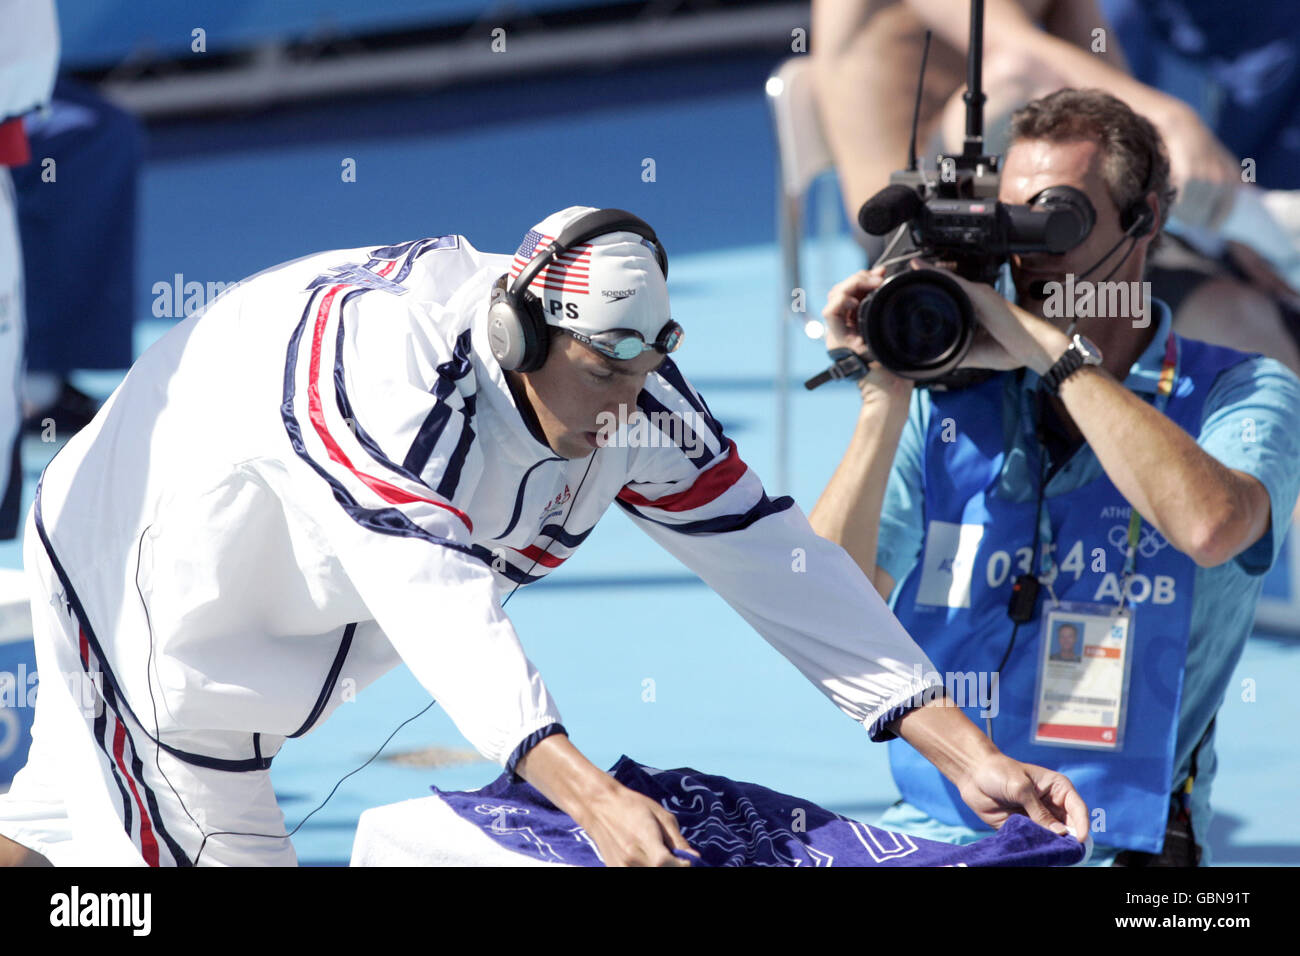 Swimming - Athens Olympic Games 2004 - Men's 200m Freestyle - Heat Six Stock Photo